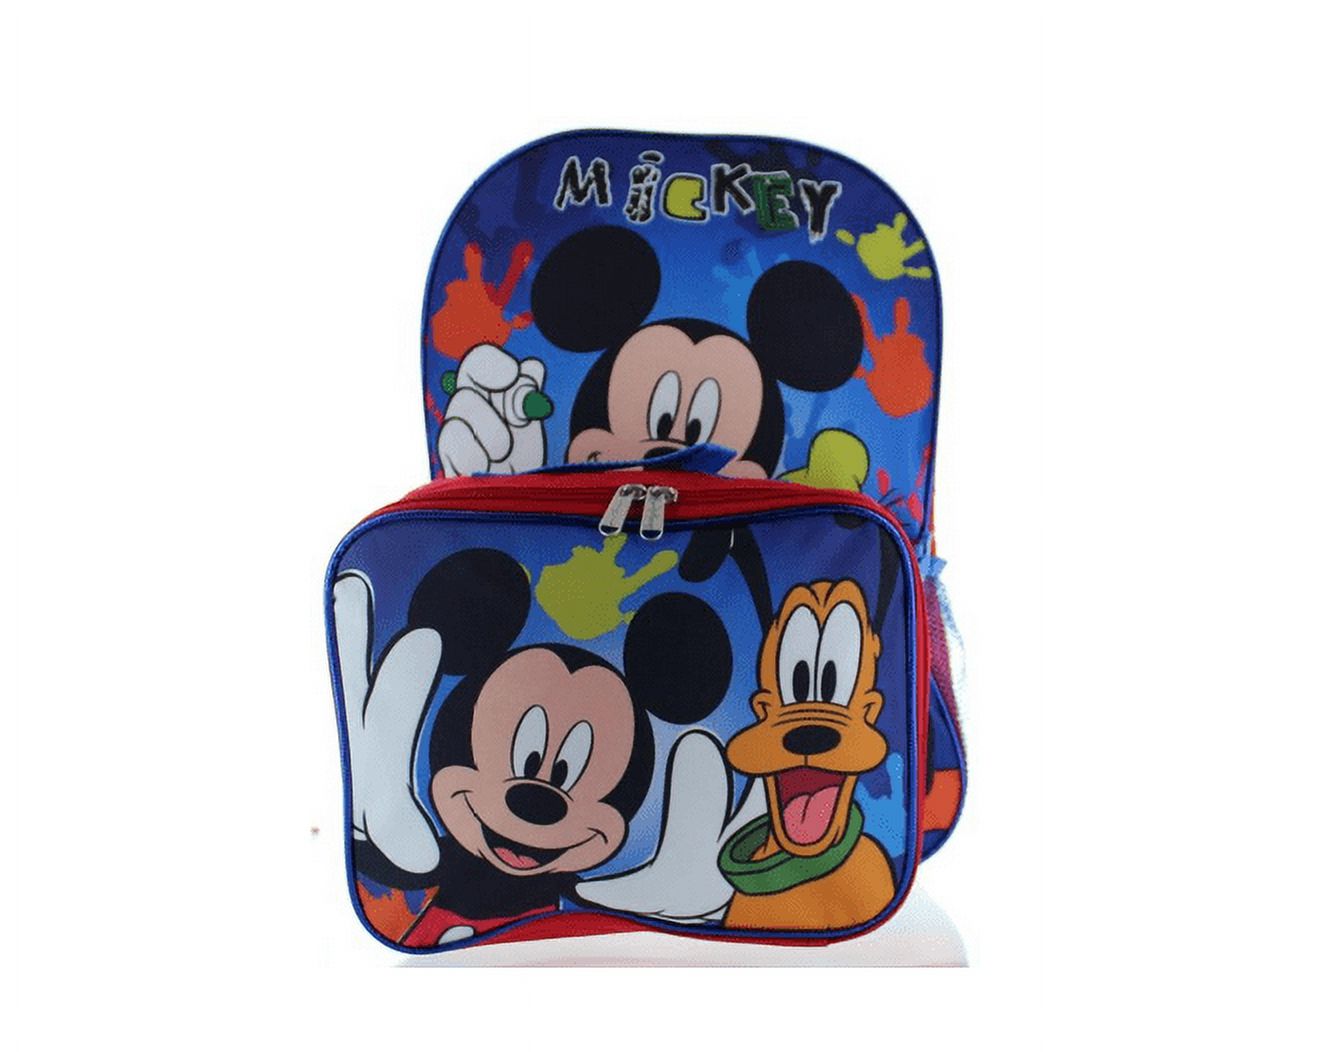 Backpack - Disney - Mickey Mouse - Blue w/Lunch Boys Bag School Bag 055041 - image 1 of 3